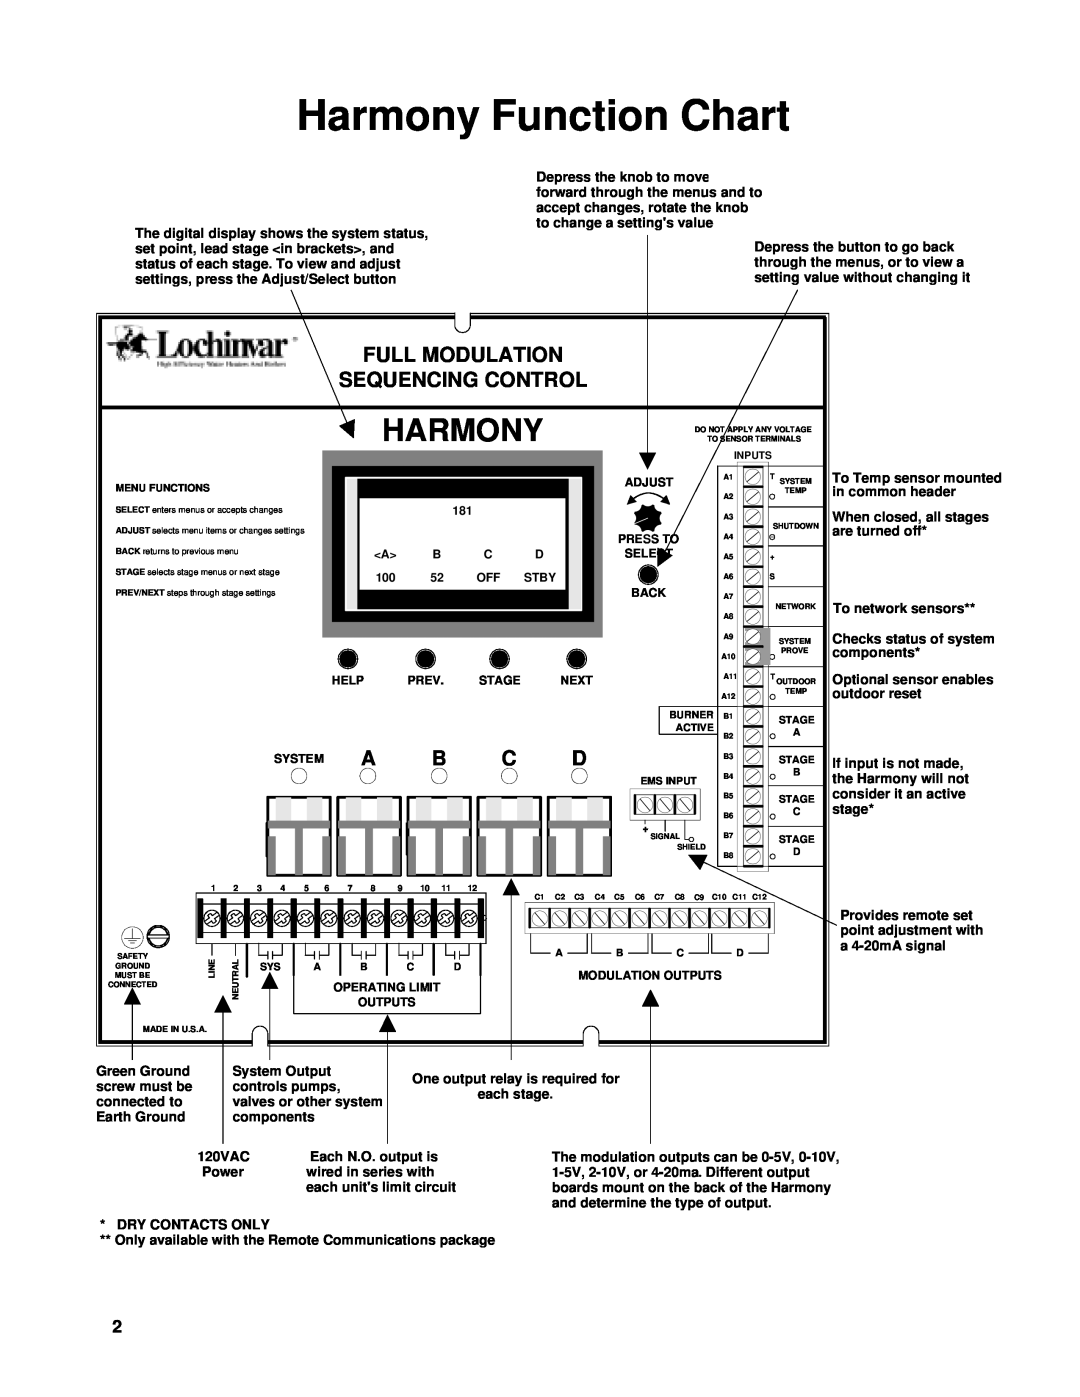 Lochinvar operation manual Harmony Function Chart, Full Modulation, Sequencing Control 